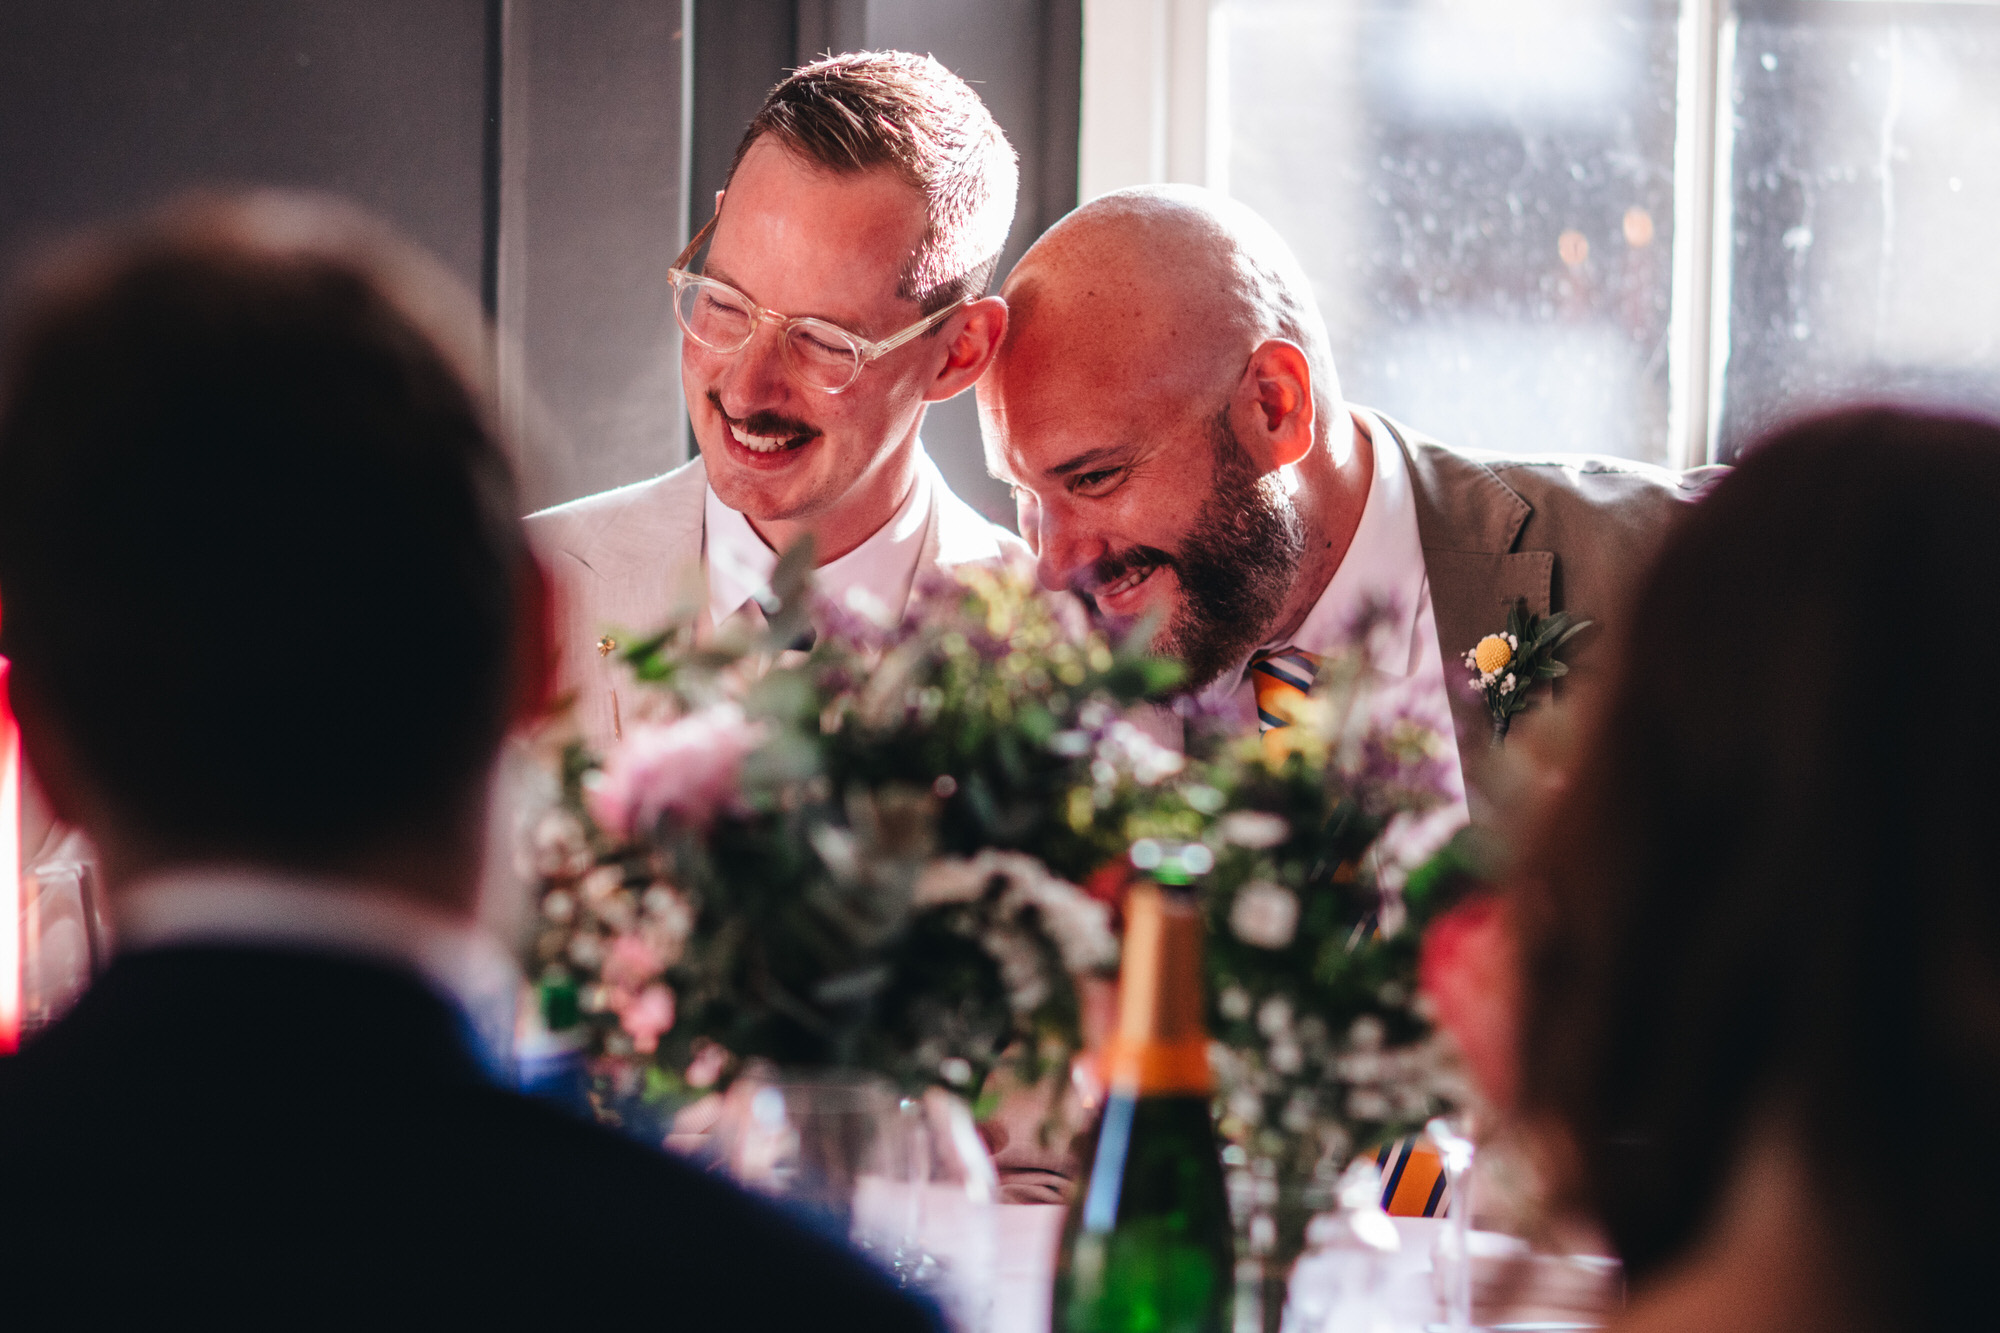 grooms laughing together, intimate moment at wedding breakfast, LGBTQ+ wedding, The Phene pub